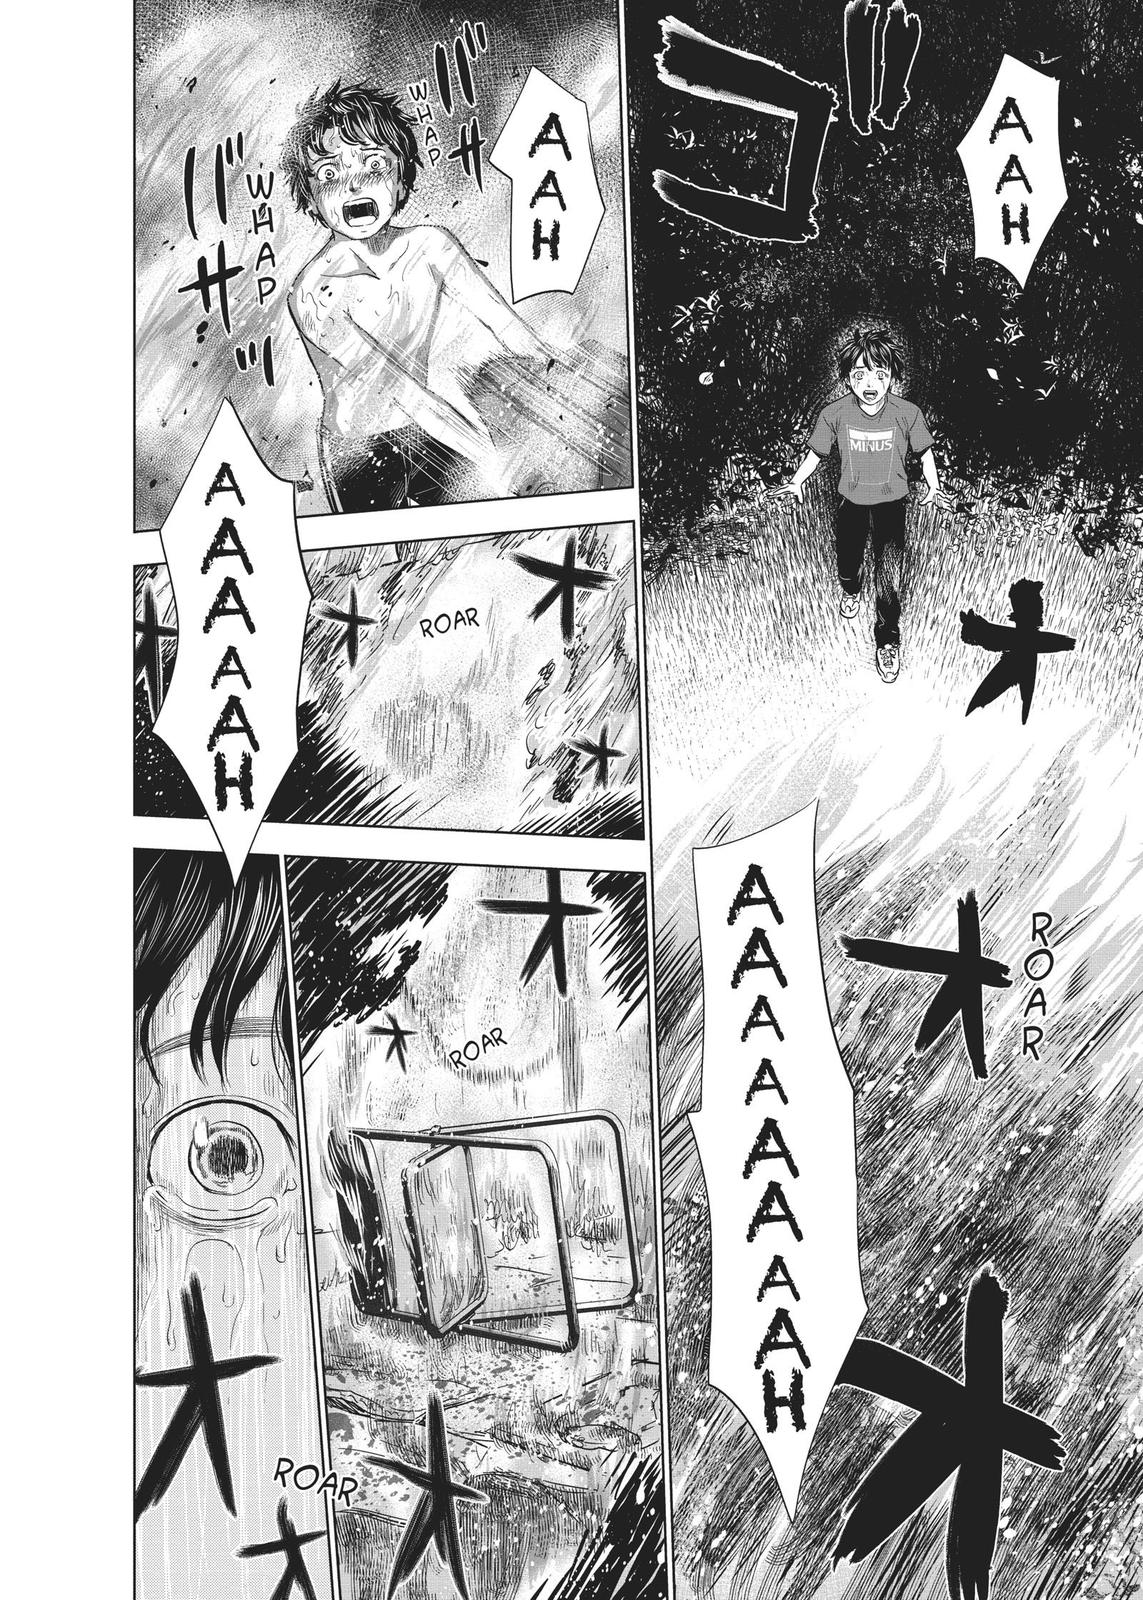 The Flowers of Evil, Chapter 26 - The Flowers of Evil Manga Online